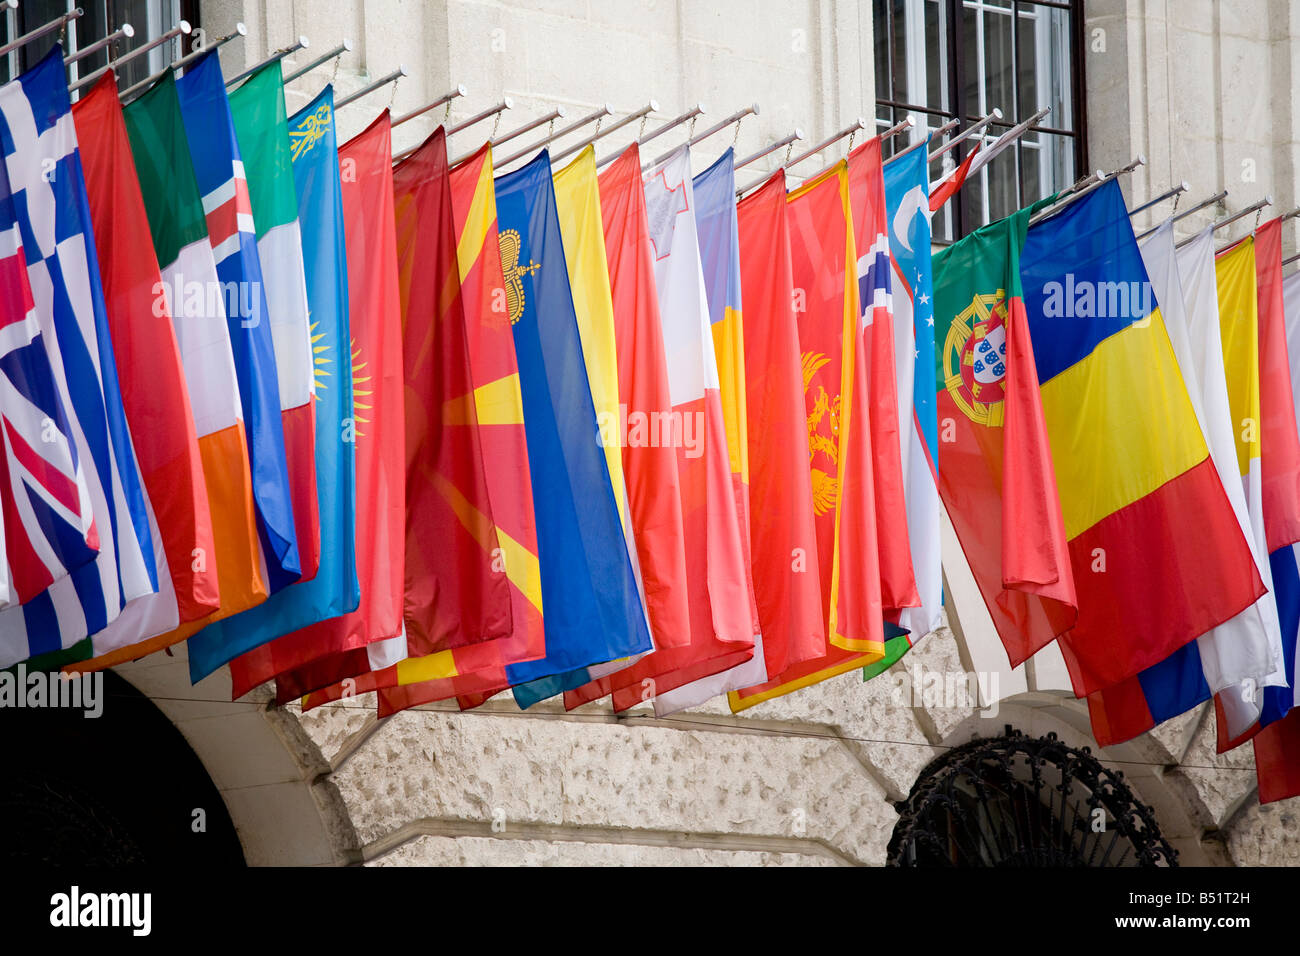 many flags from different countries Stock Photo